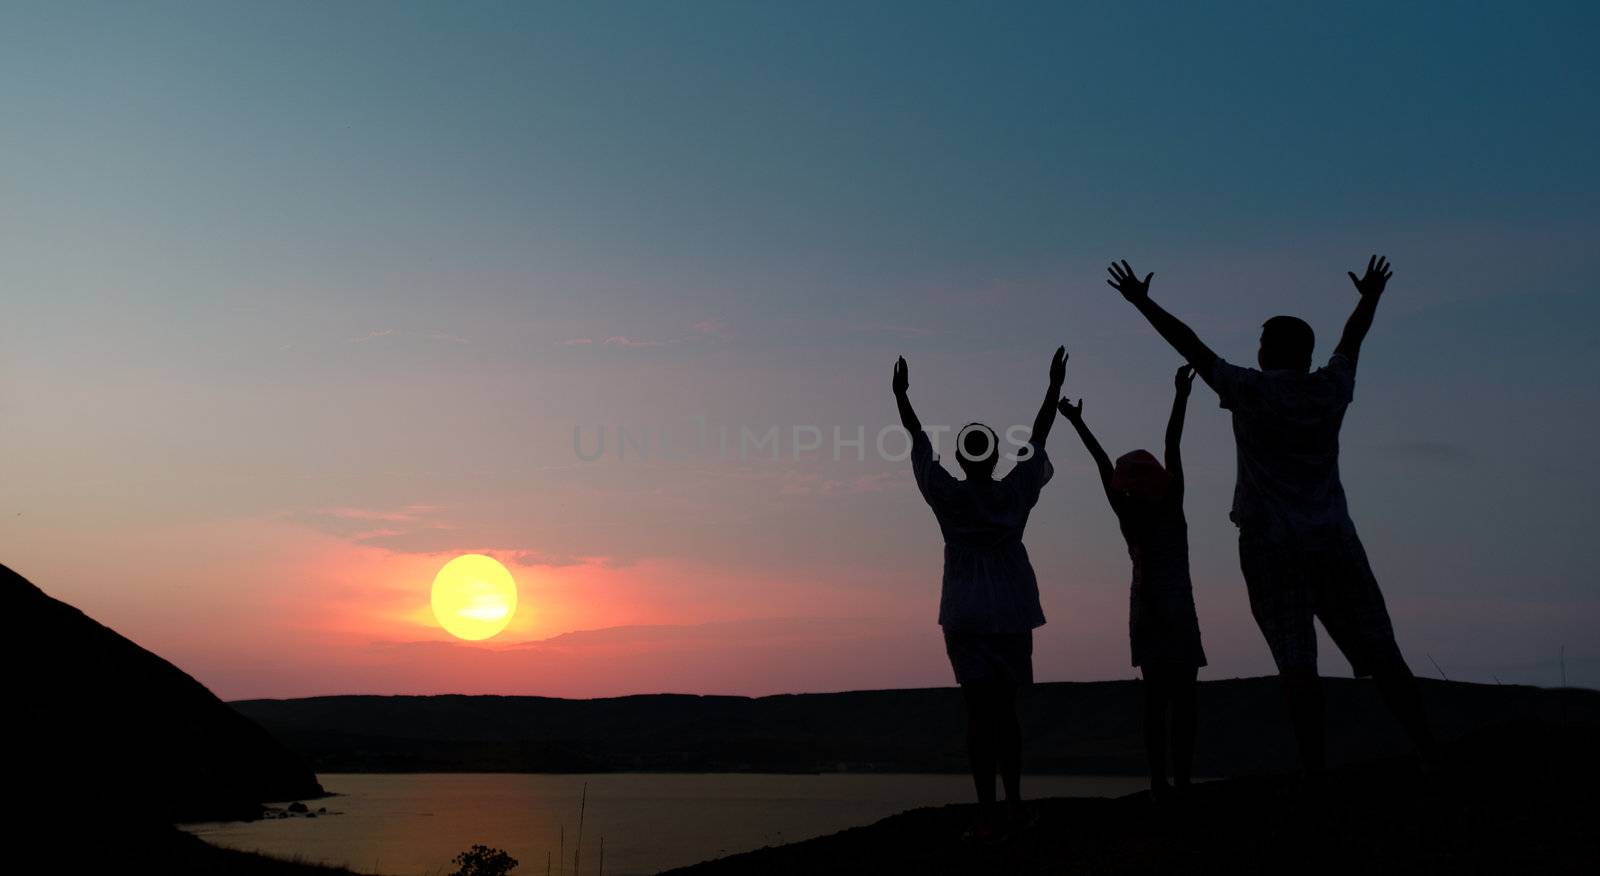 The family from three persons welcomes the sunset sun by galdzer